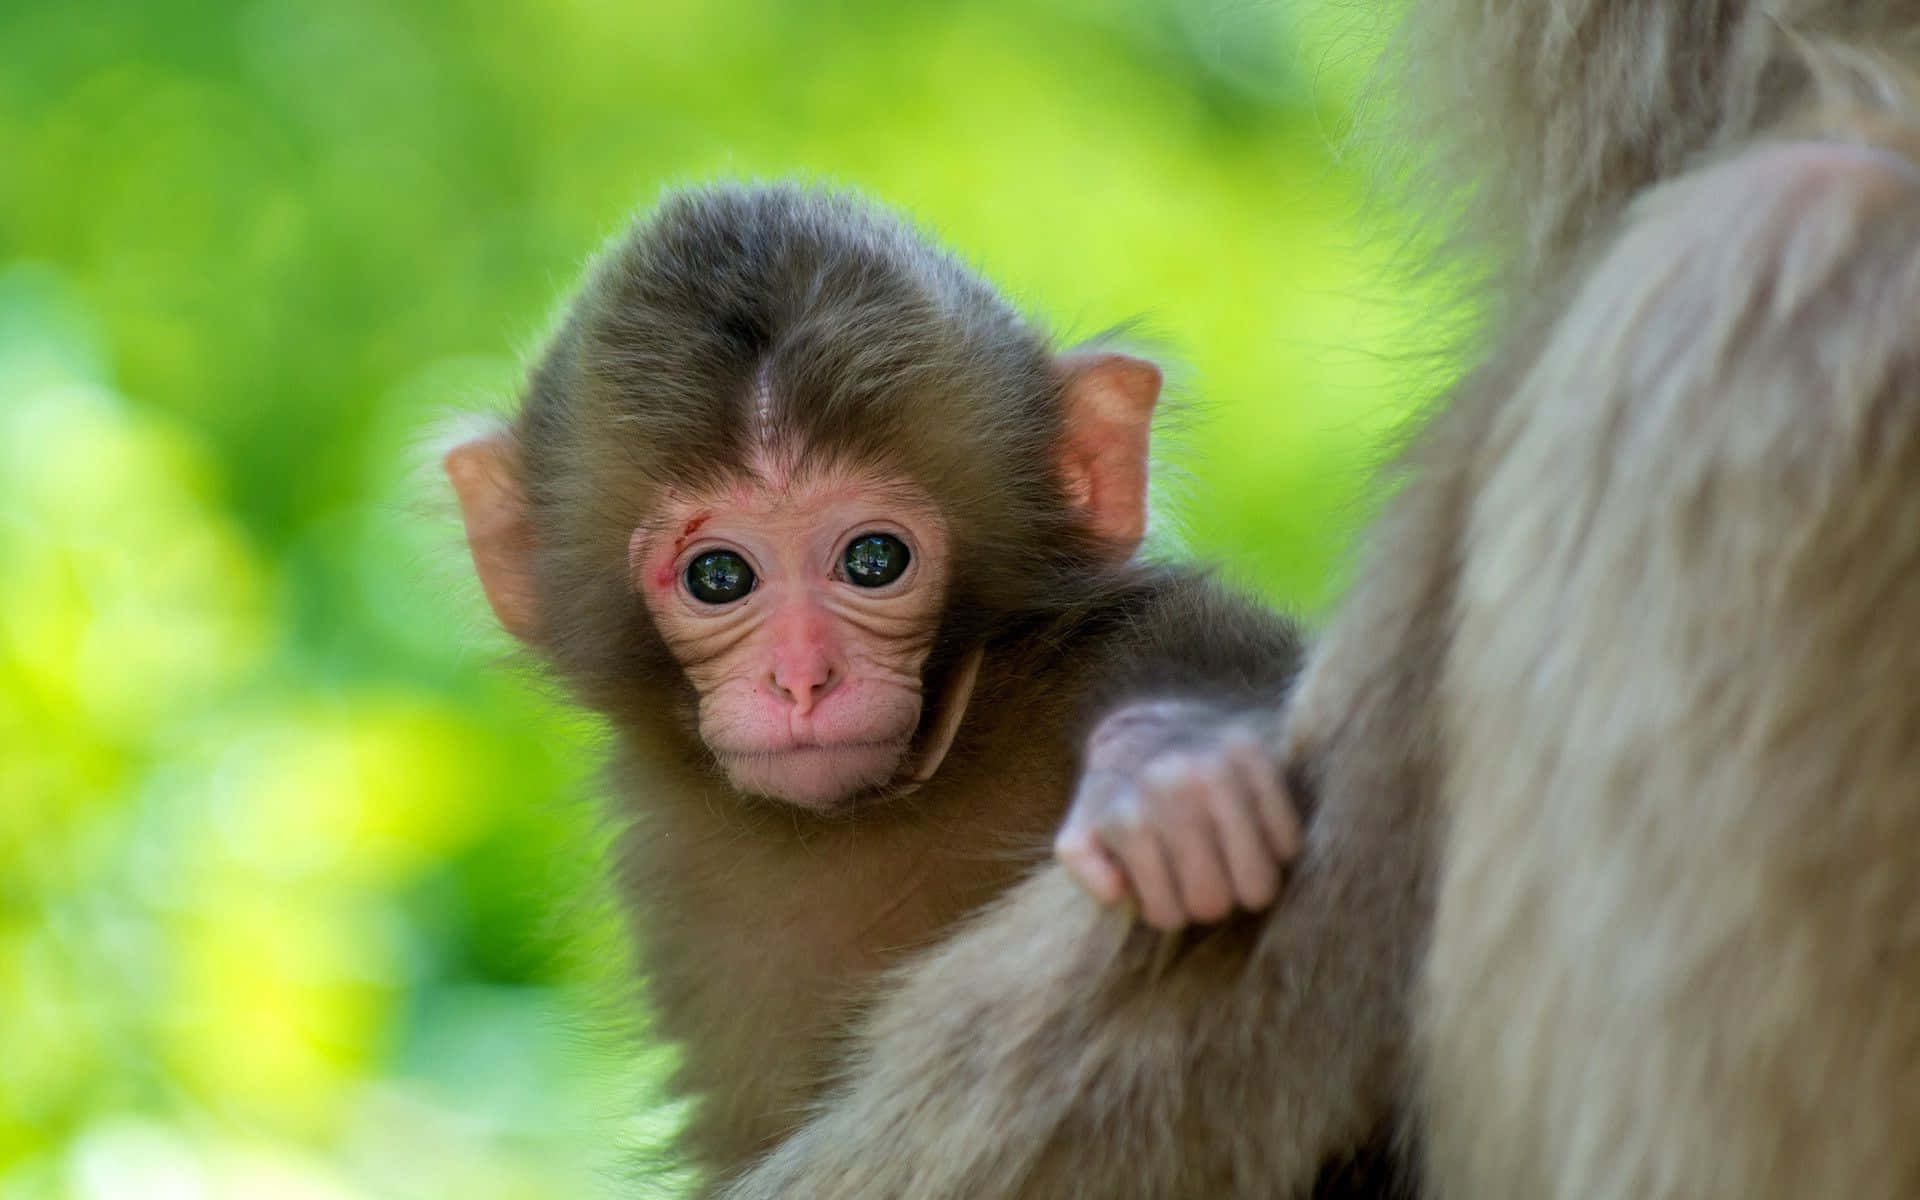 "Aww, look at this adorable monkey!"